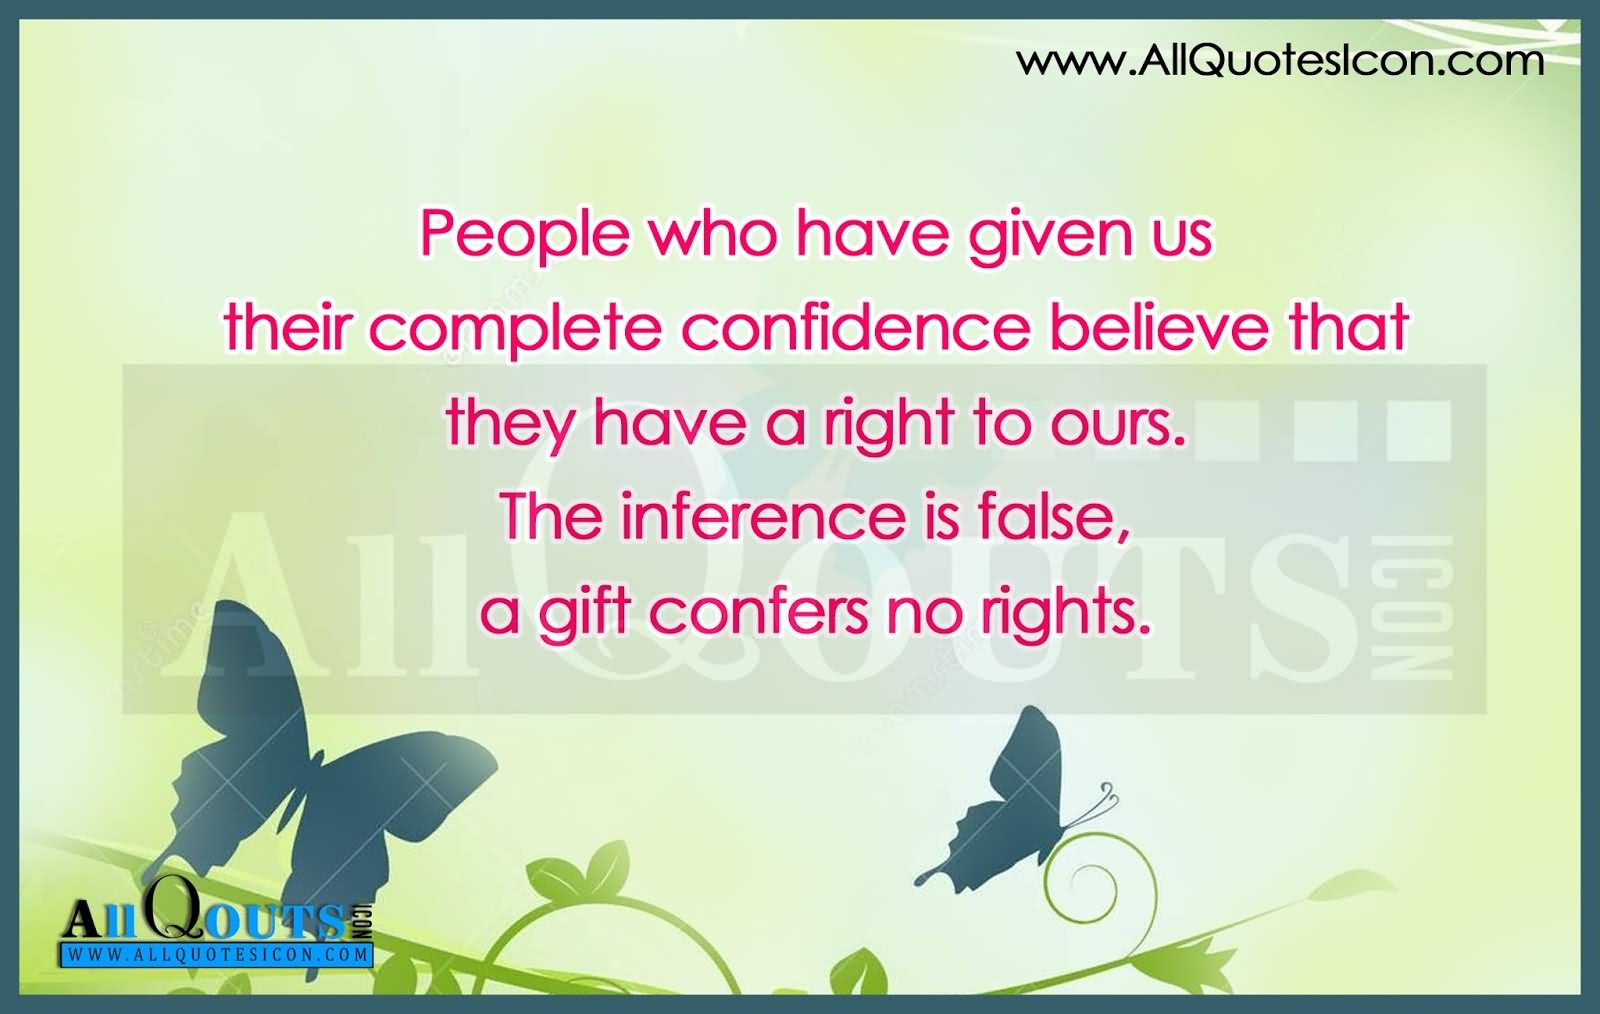 People who have given us their complete confidence believe that they have a right to ours. The inference is false, a gift confers no rights.